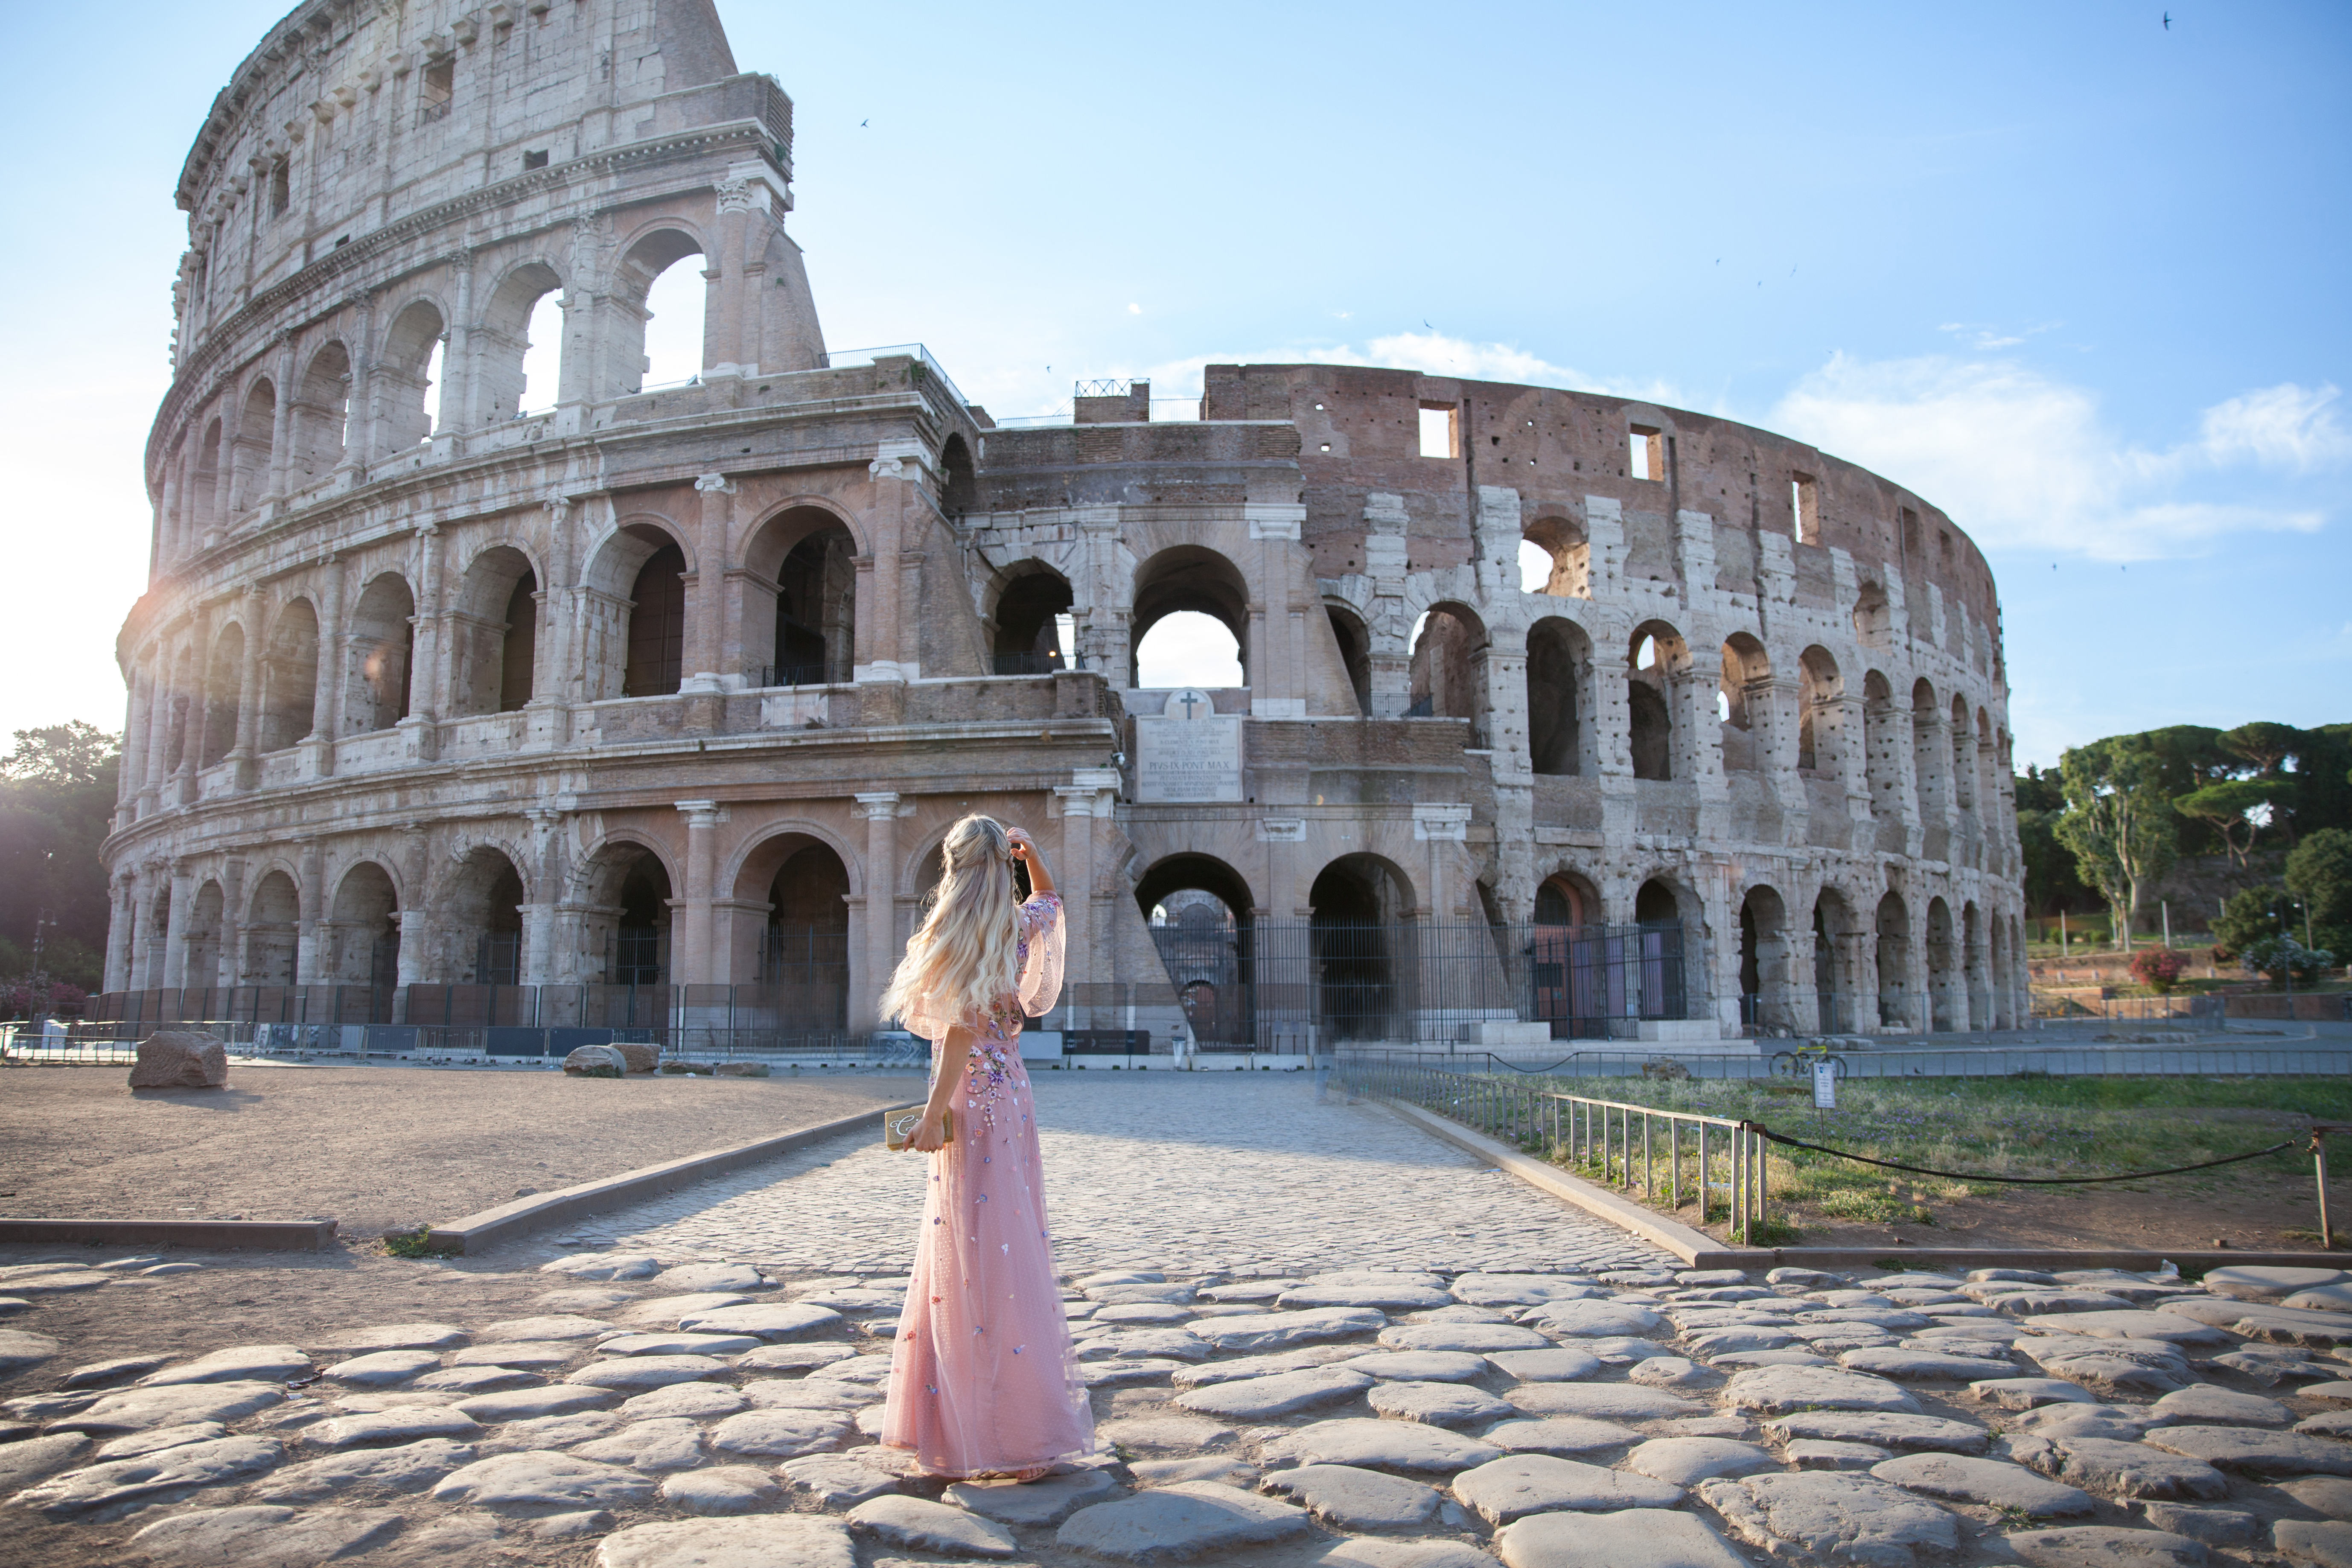 Colosseum_asos embroidered dress Rome | ASOS floral embroidered maxi dress featured by top San Francisco fashion blog, Lombard and Fifth: image of a blonde woman wearing a floral maxi dress at the Colosseum in Rome